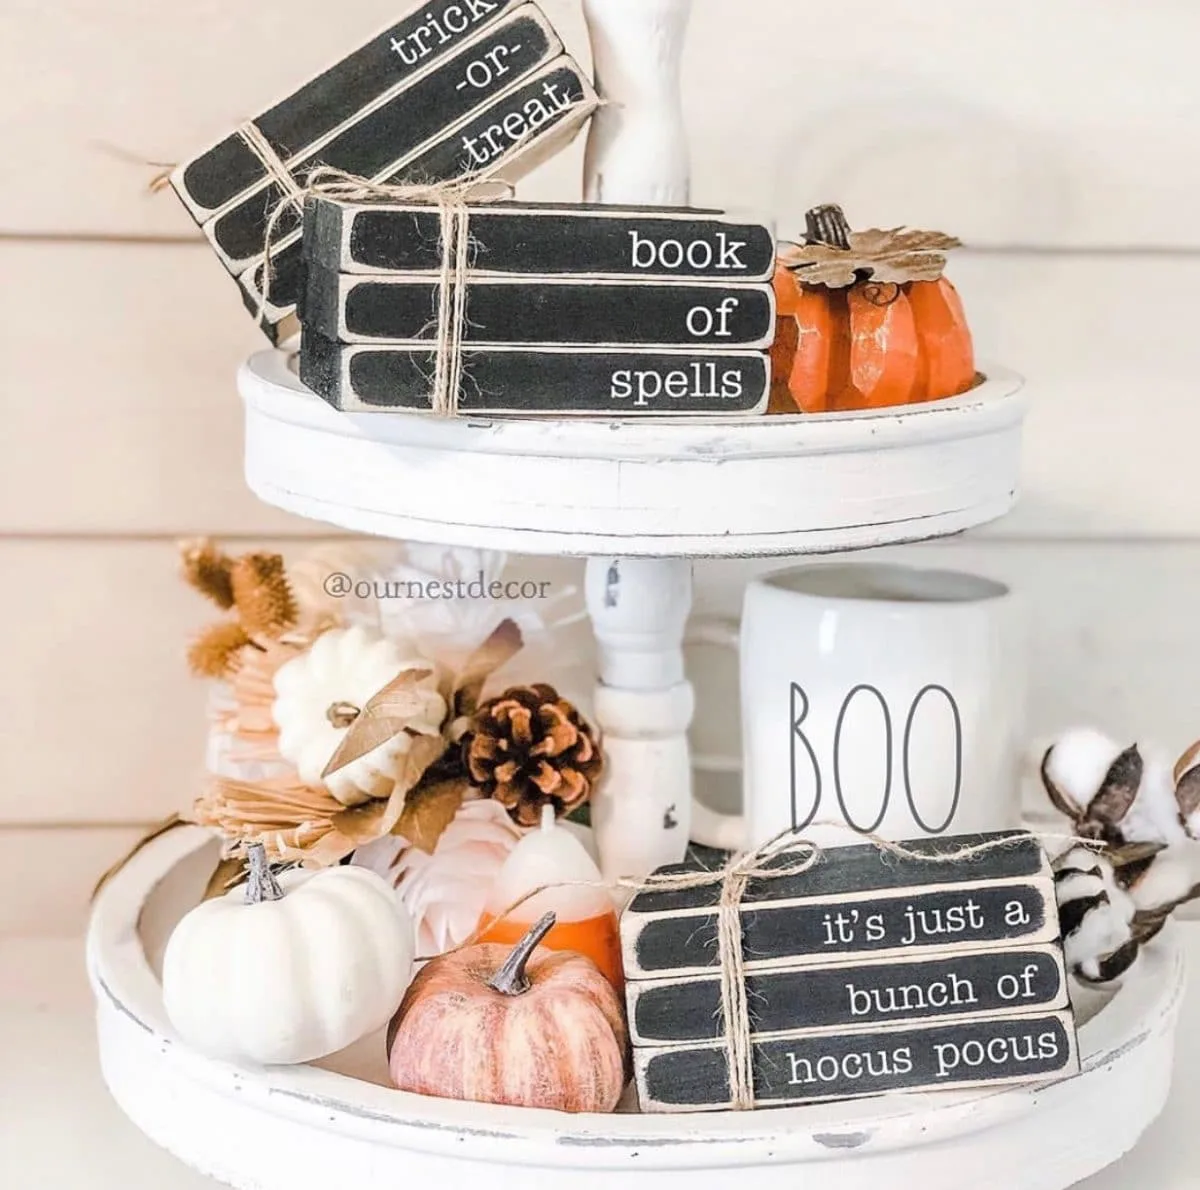 Halloween tiered tray ideas for home.  Pumpkins, pinecones, cotton, boo Rae Dunn mug and wooden books with saying like It's just a bunch of hocus pocus